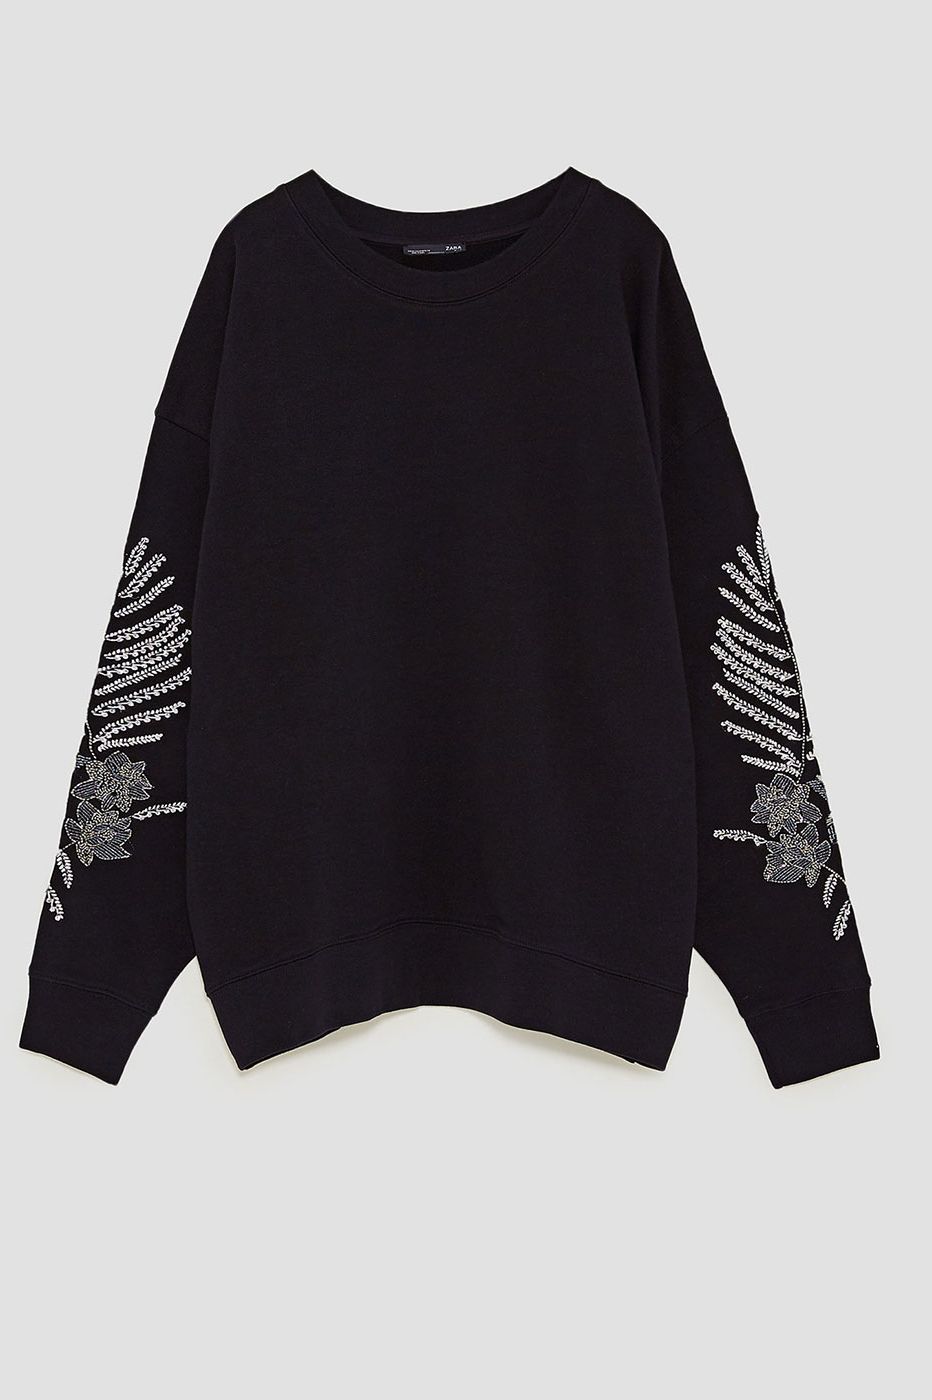 Clothing, Black, Sleeve, Long-sleeved t-shirt, Outerwear, T-shirt, Blouse, Top, Neck, Crop top, 